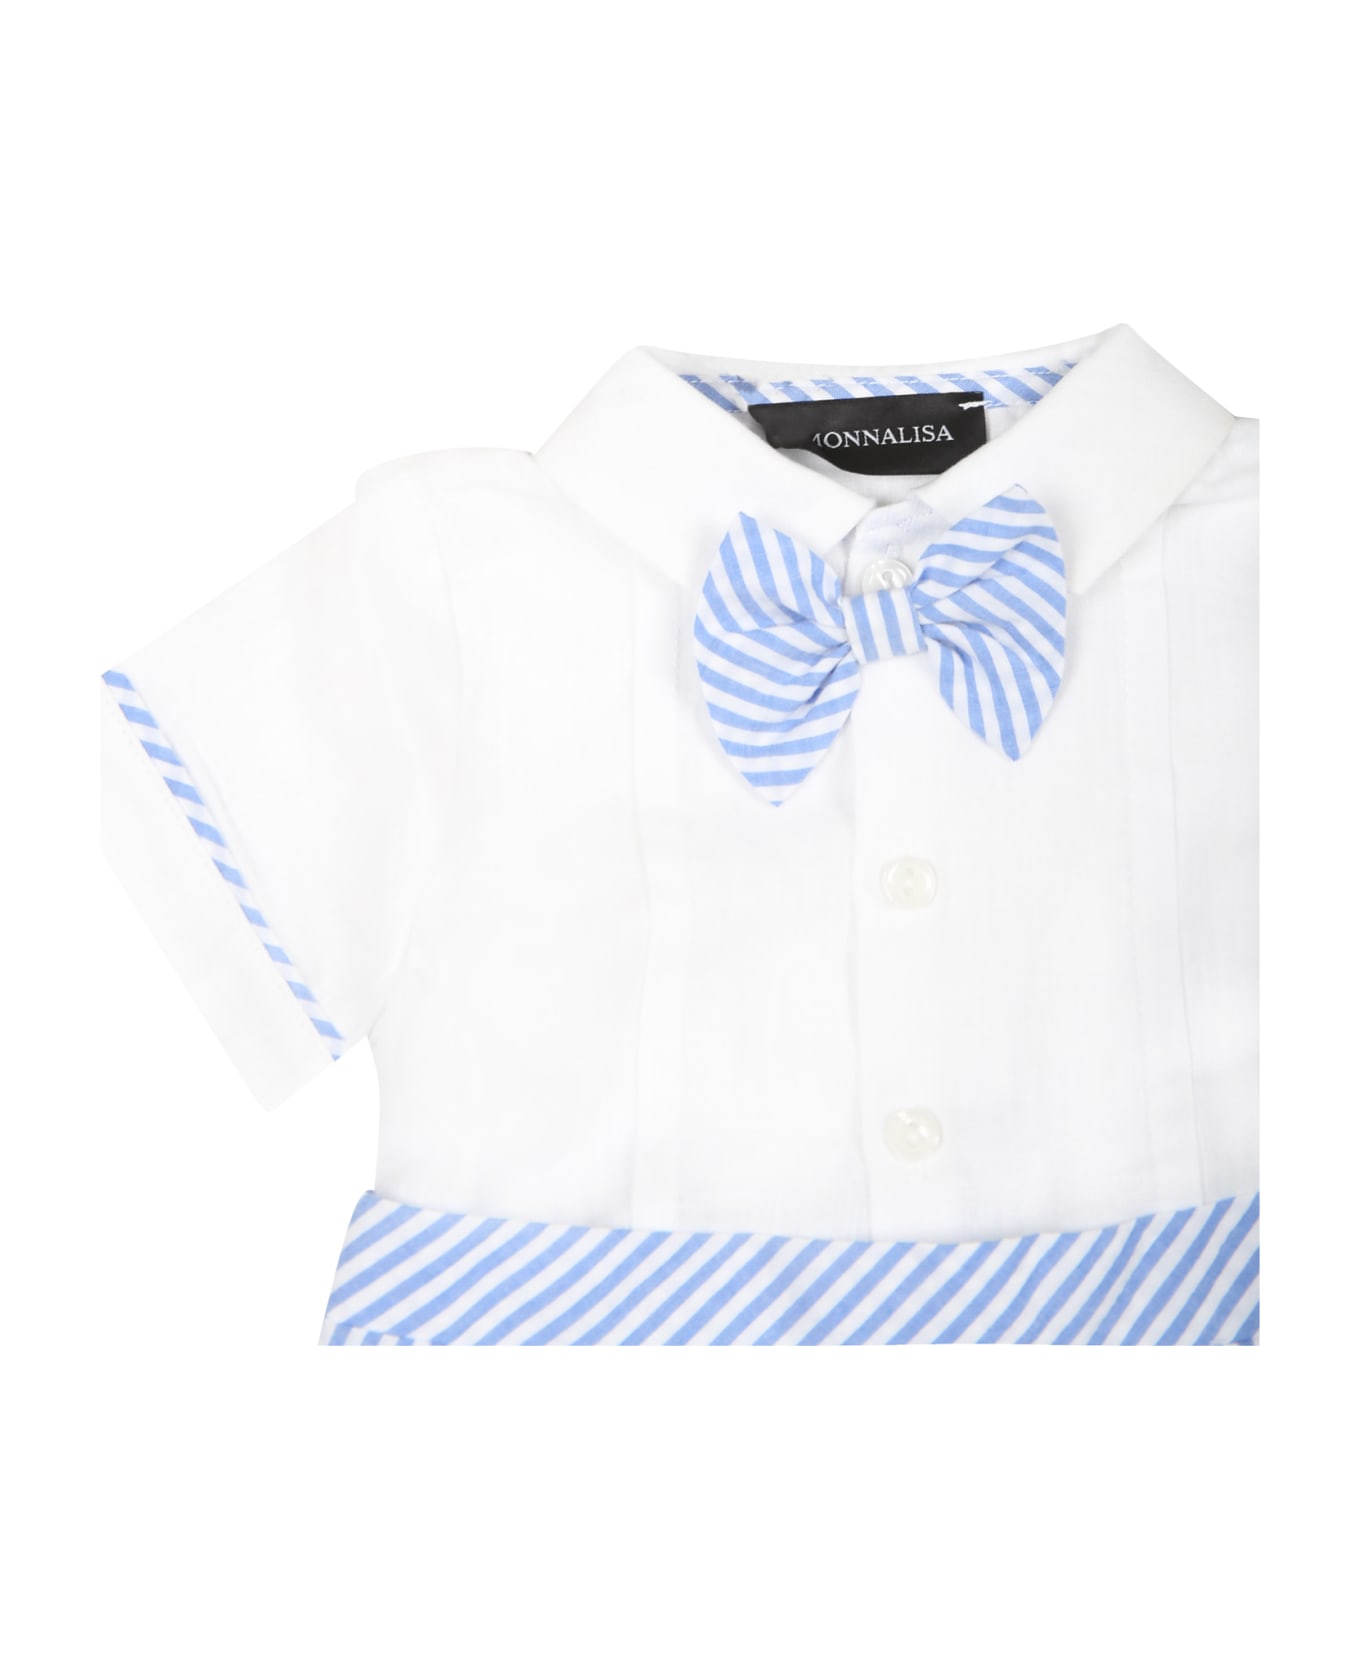 Monnalisa Light Blue Romper For Baby Boy With Bow Tie - White